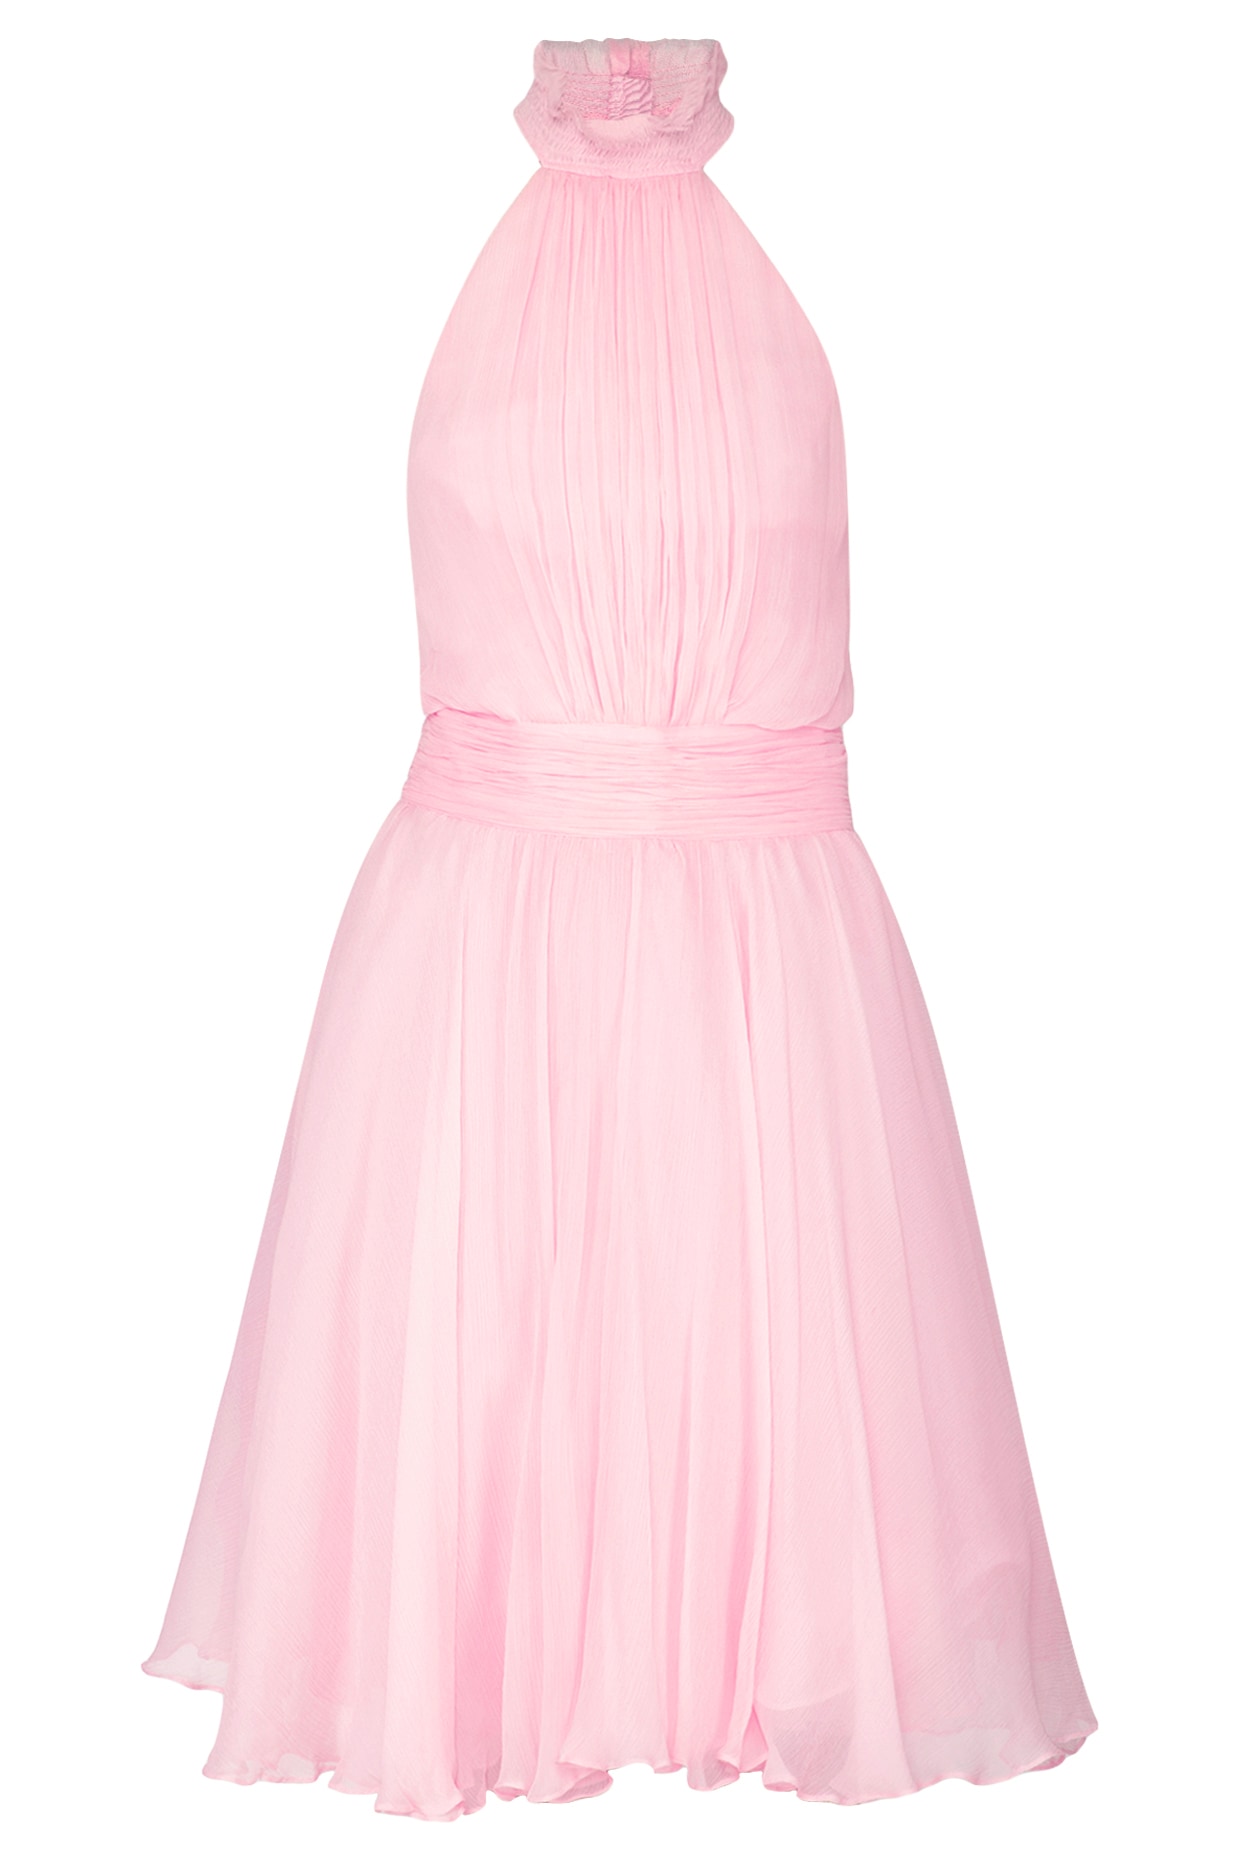 Light Pink Frock Dress Design by AMIT 